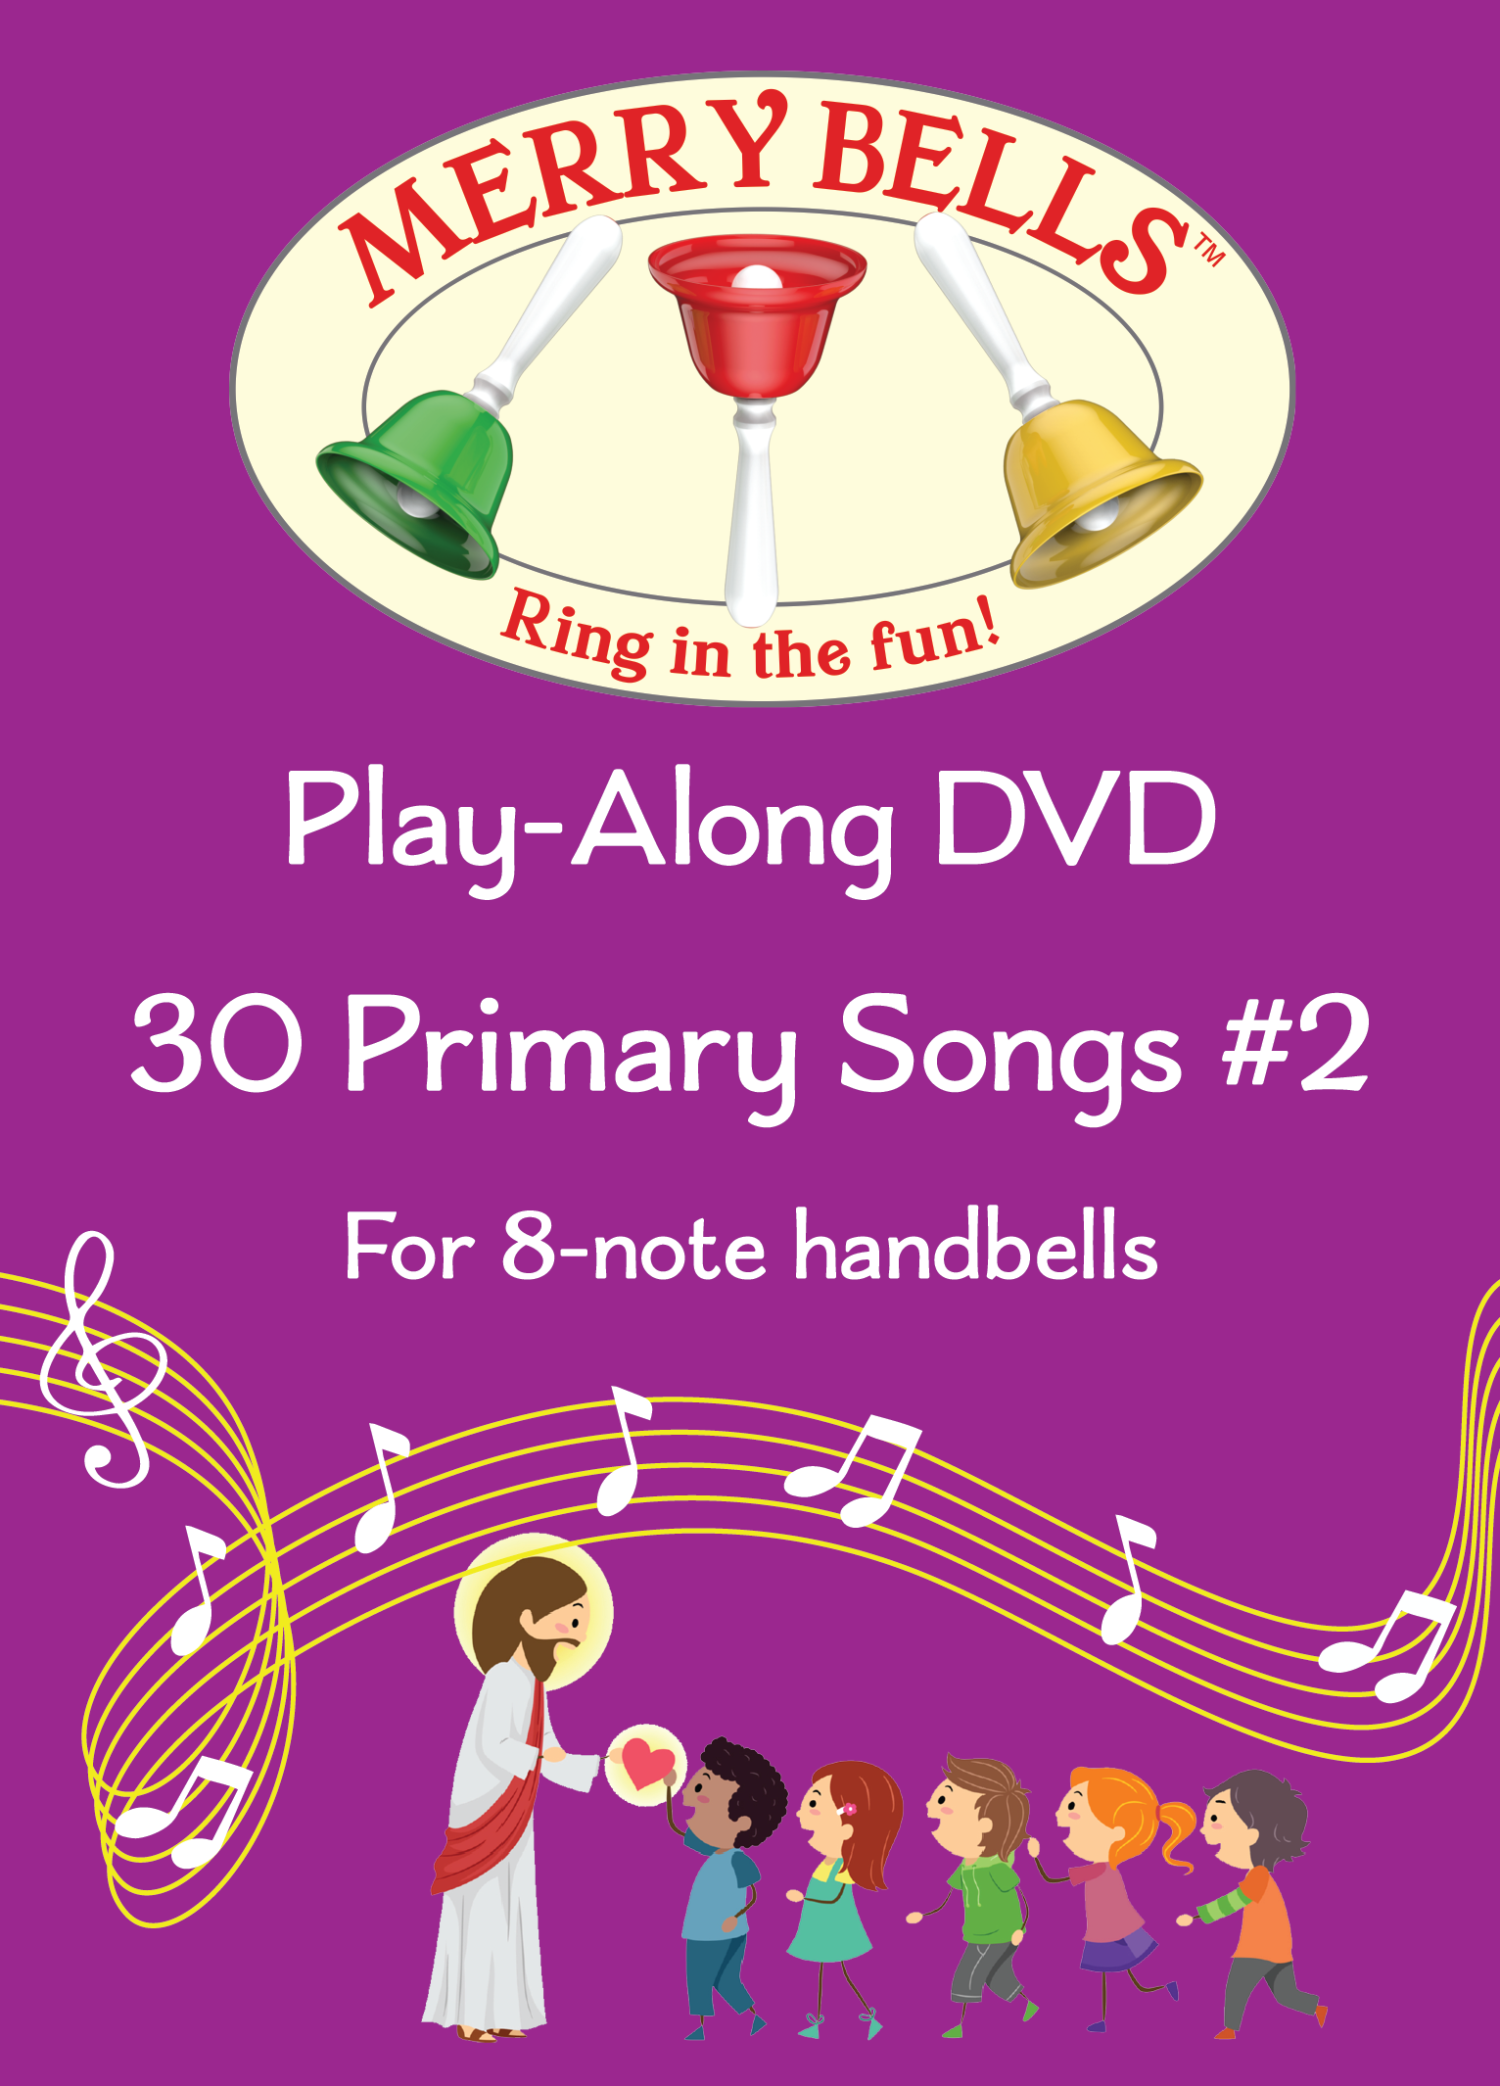 Merry Bells Primary Song List Play-Along handbell charts for LDS Primary Music Leaders Singing Time